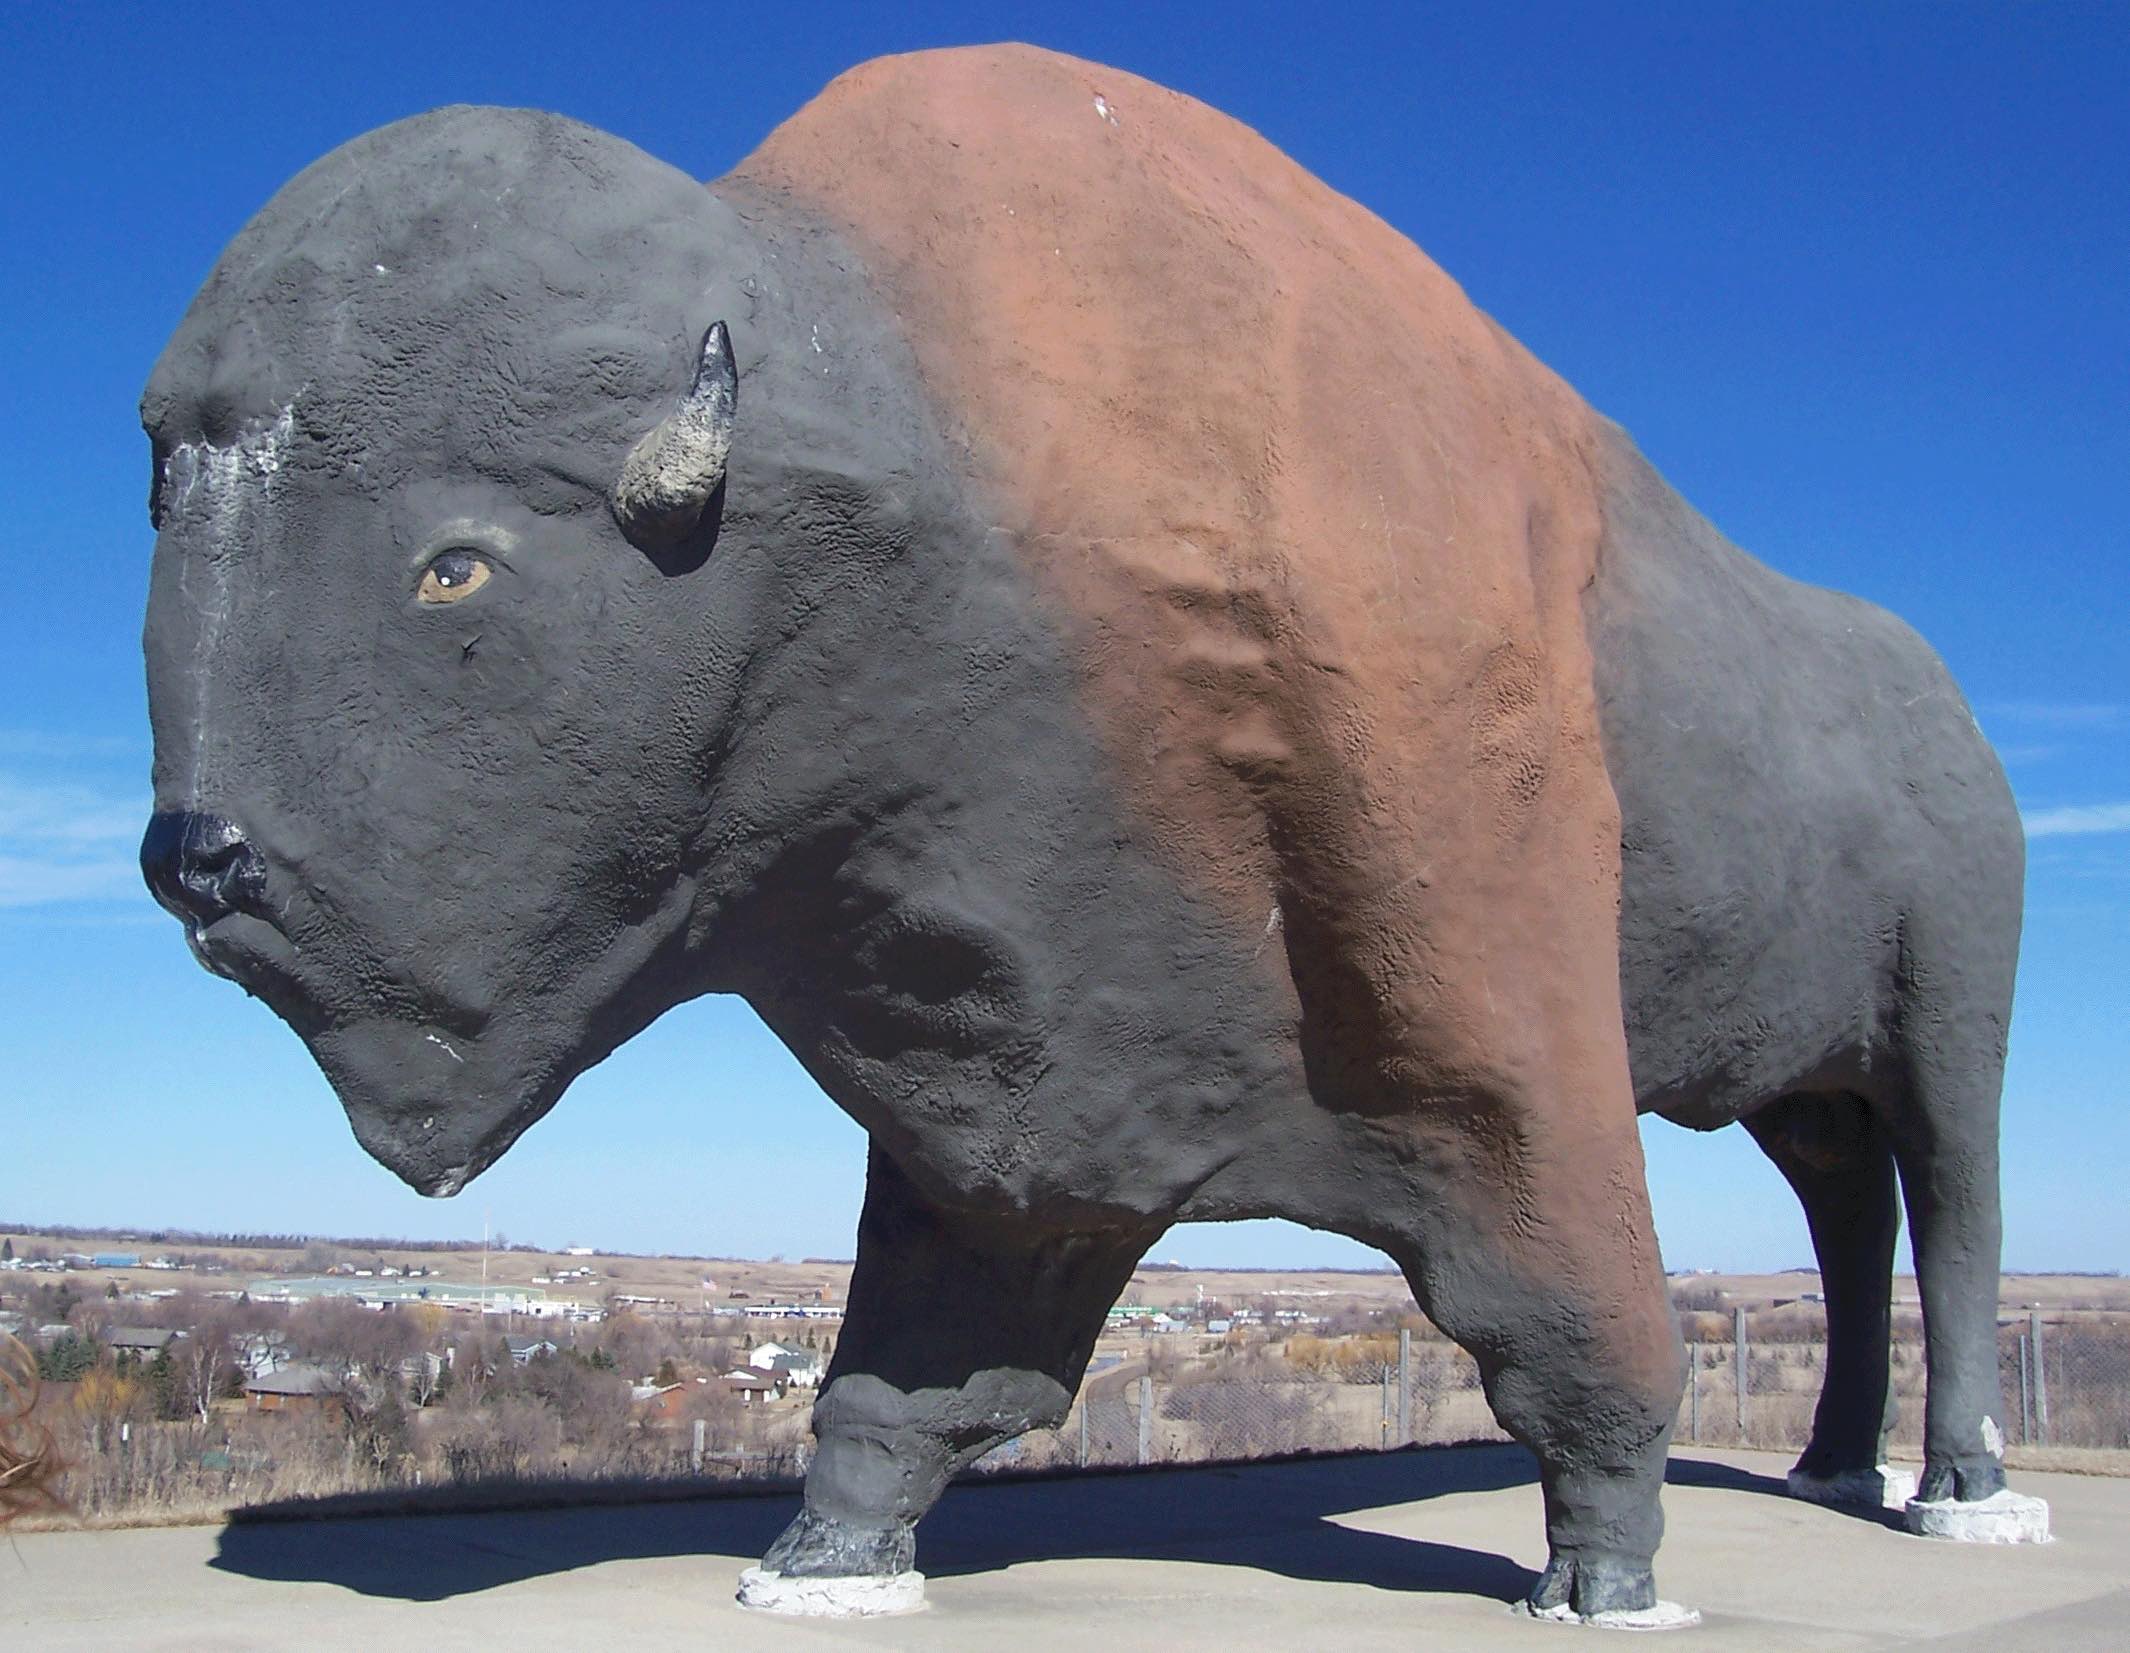 The world's tallest buffalo statue located in Jamestown, ND